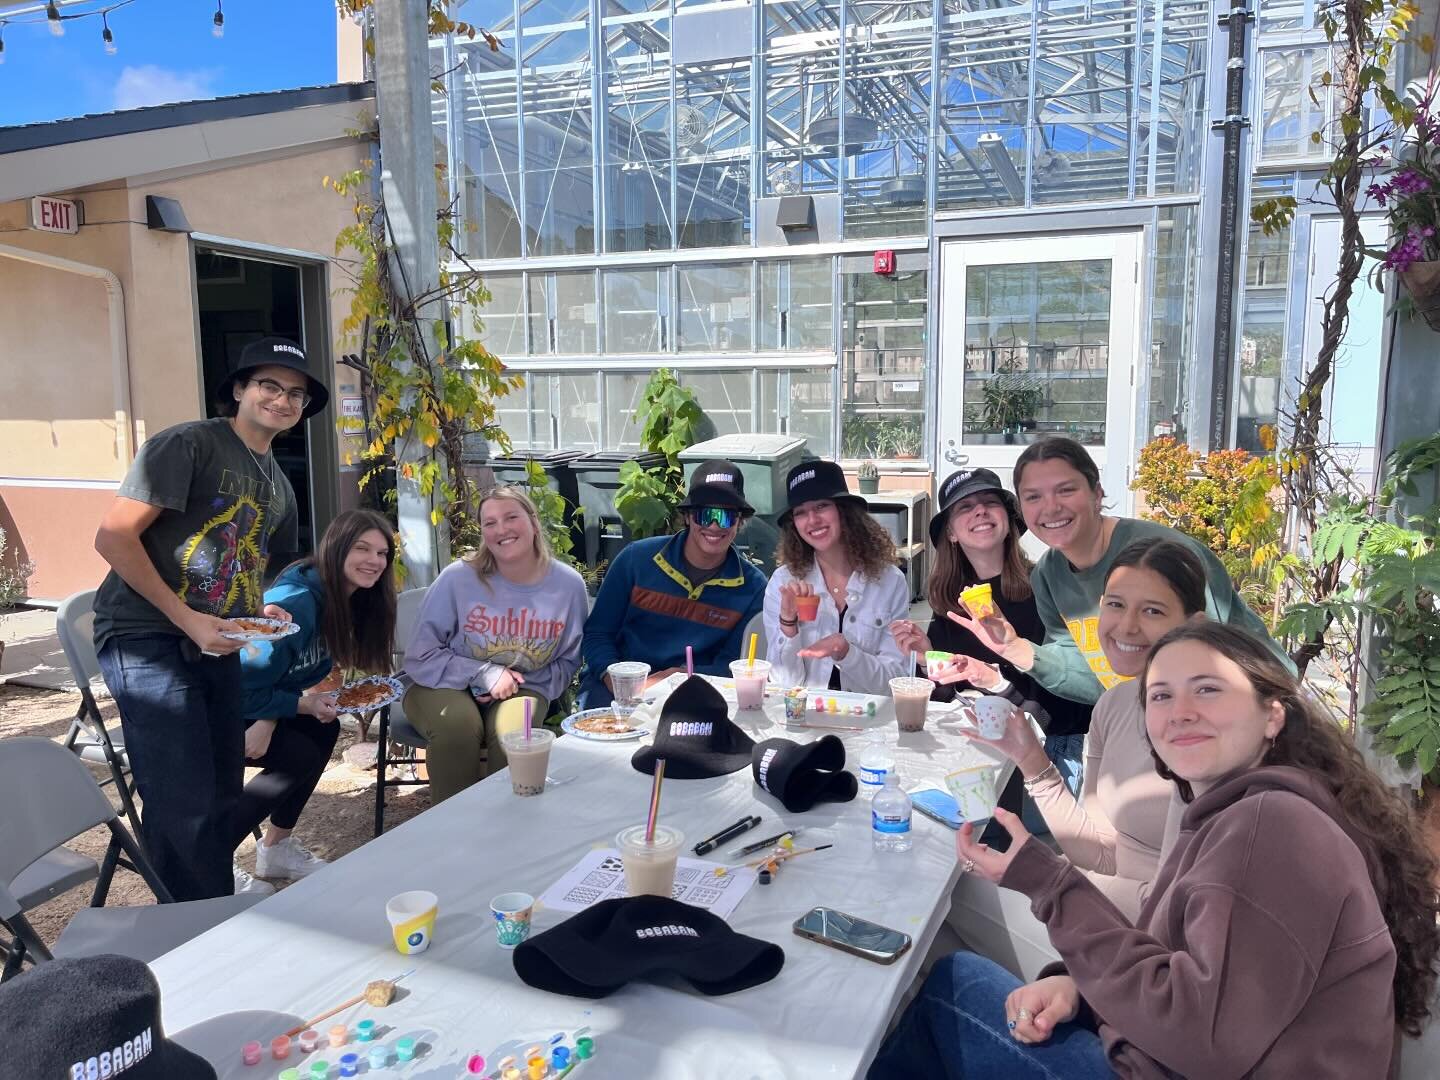 We had the BEST time painting pots, planting flowers, eating Thai food, and drinking delicious boba from @drinkbobabam 🧋Thanks for a great turnout!